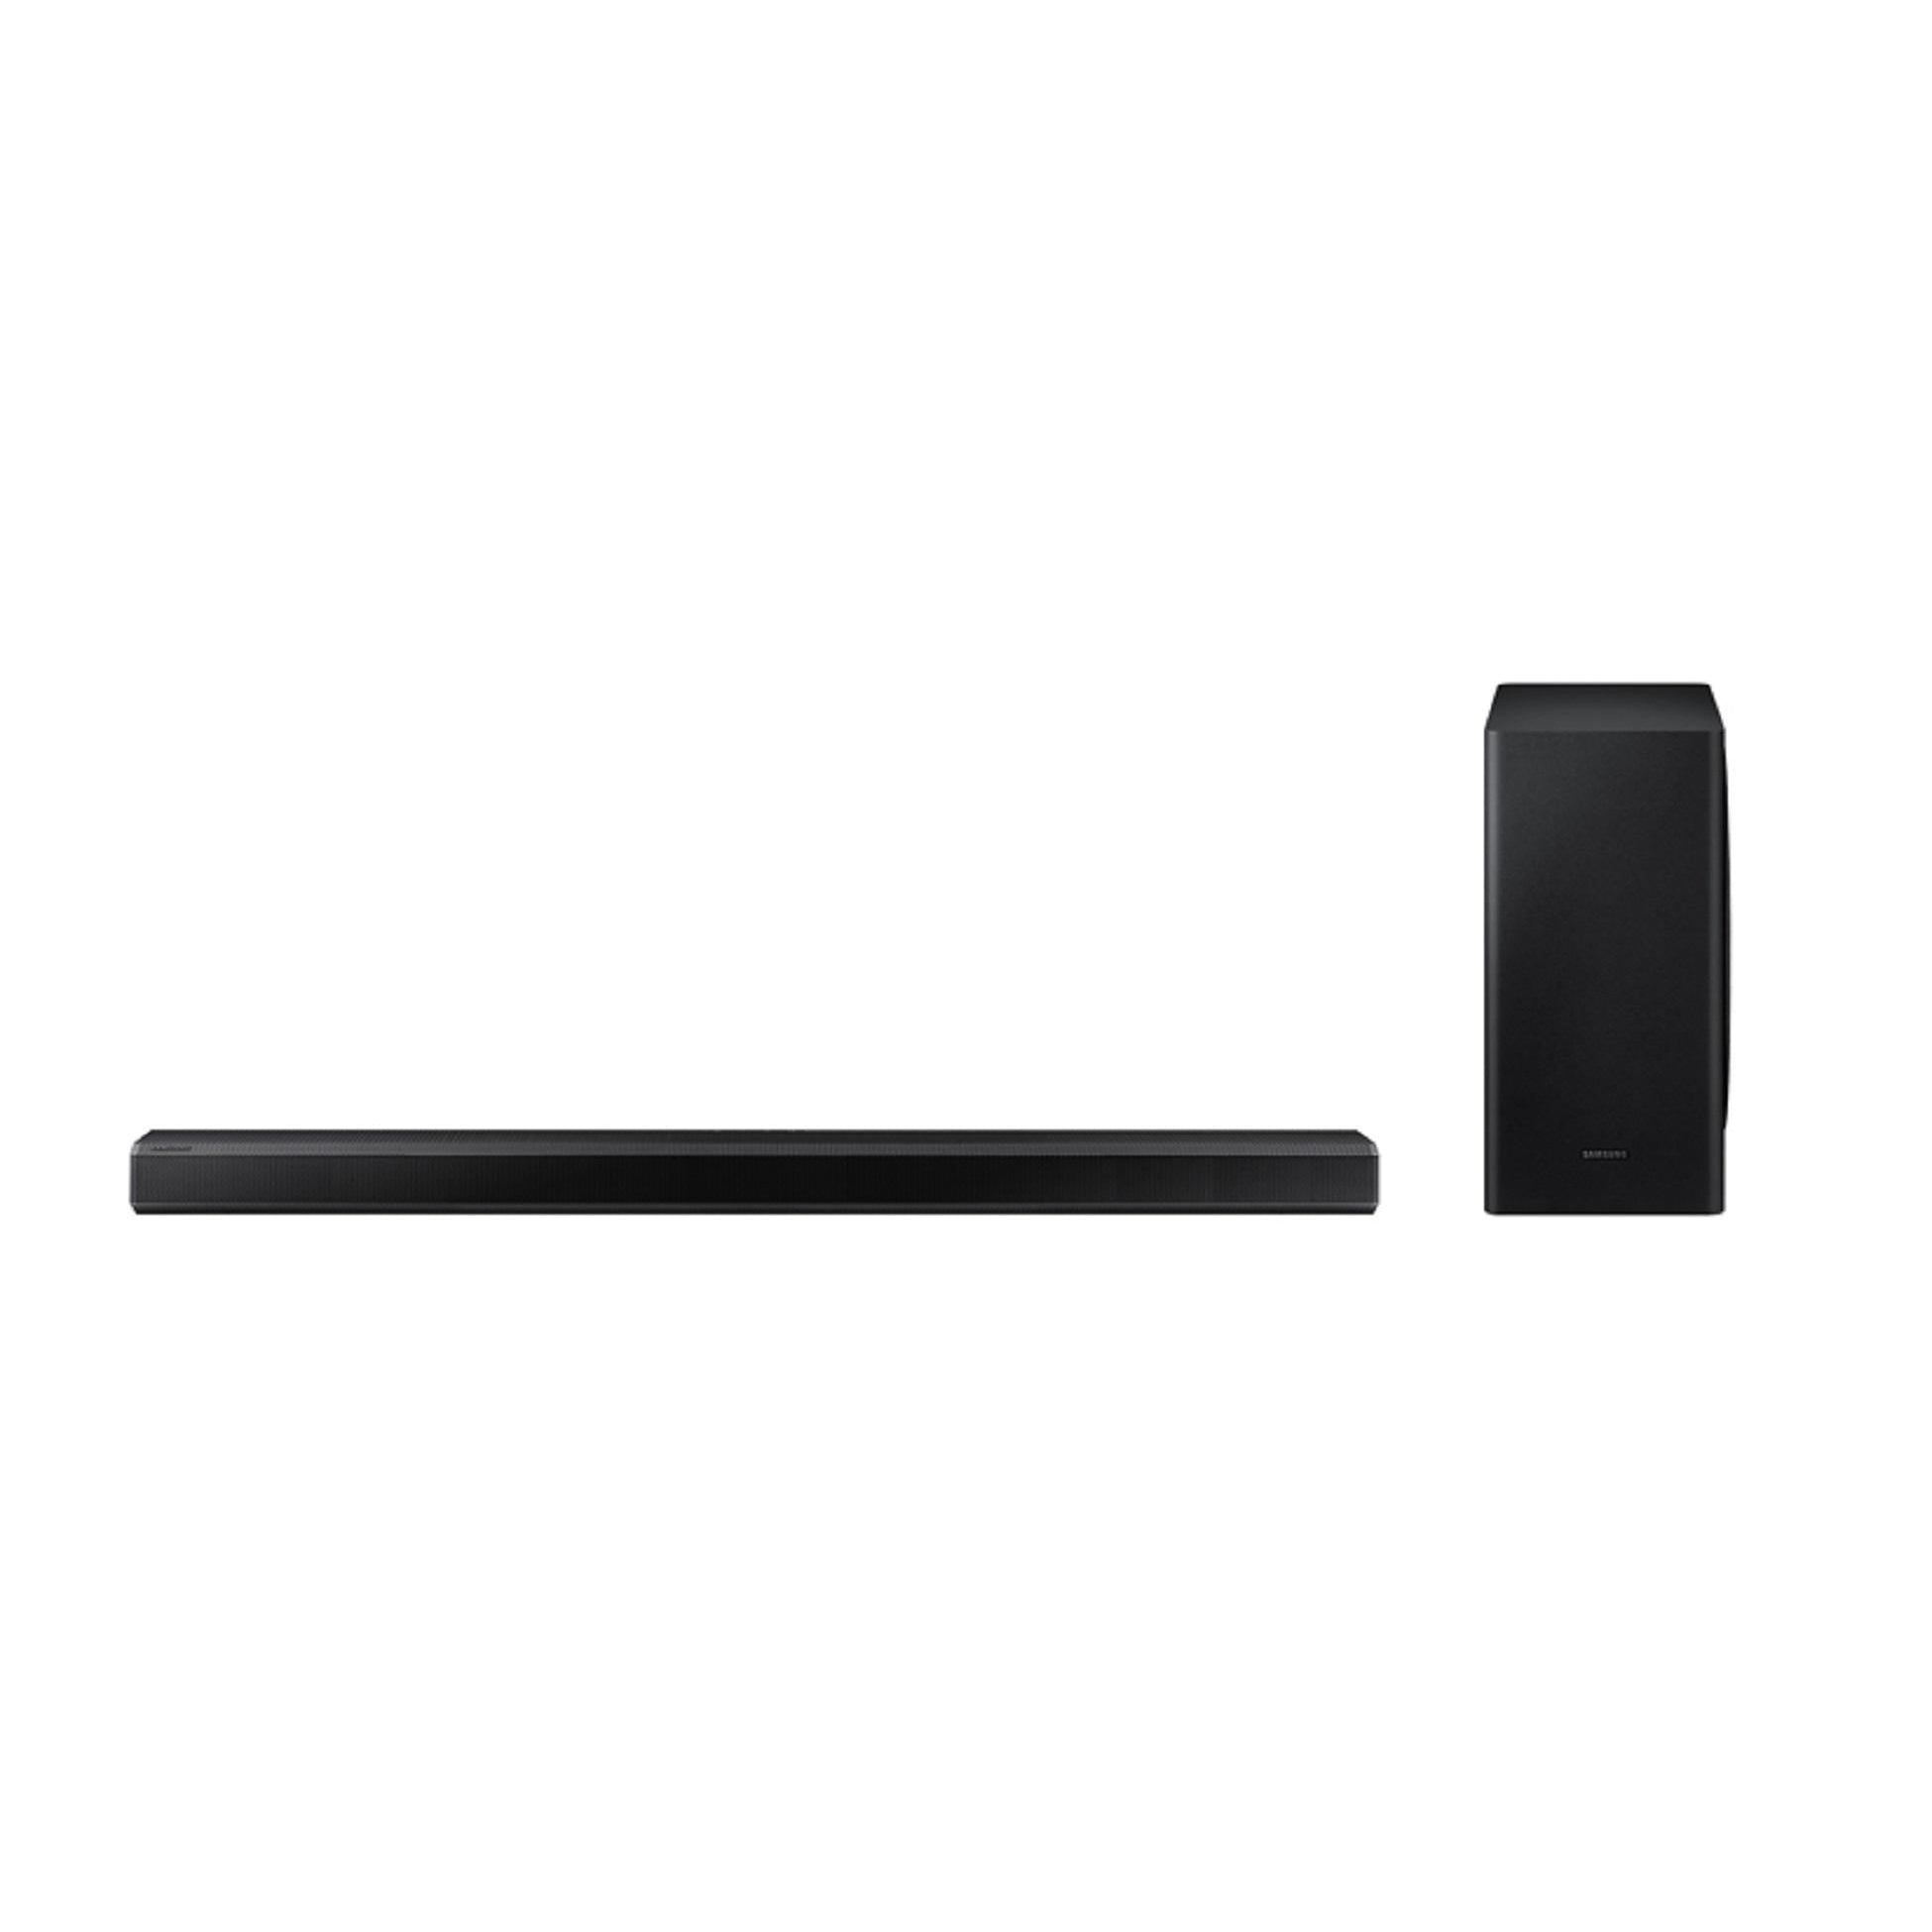 Samsung HW-Q800T 3.1.2ch Cinematic Soundbar with Dolby Atmos and DTS:X